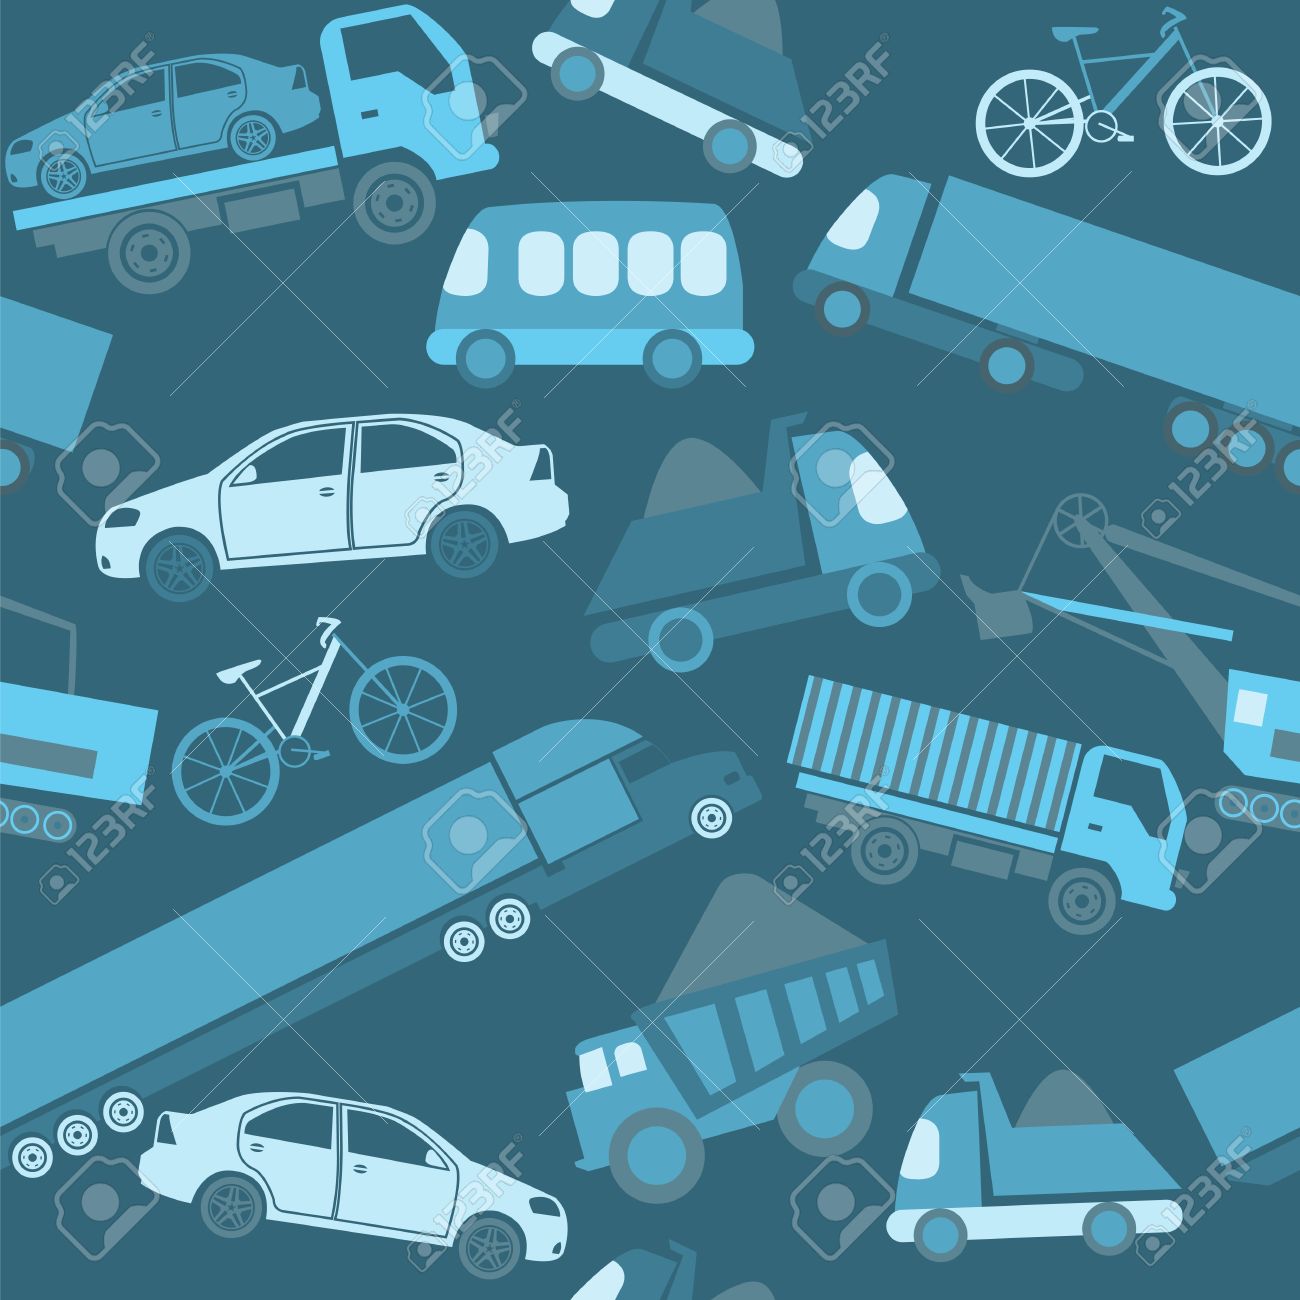 Car Service And Some Types Of Transportation Background Vector